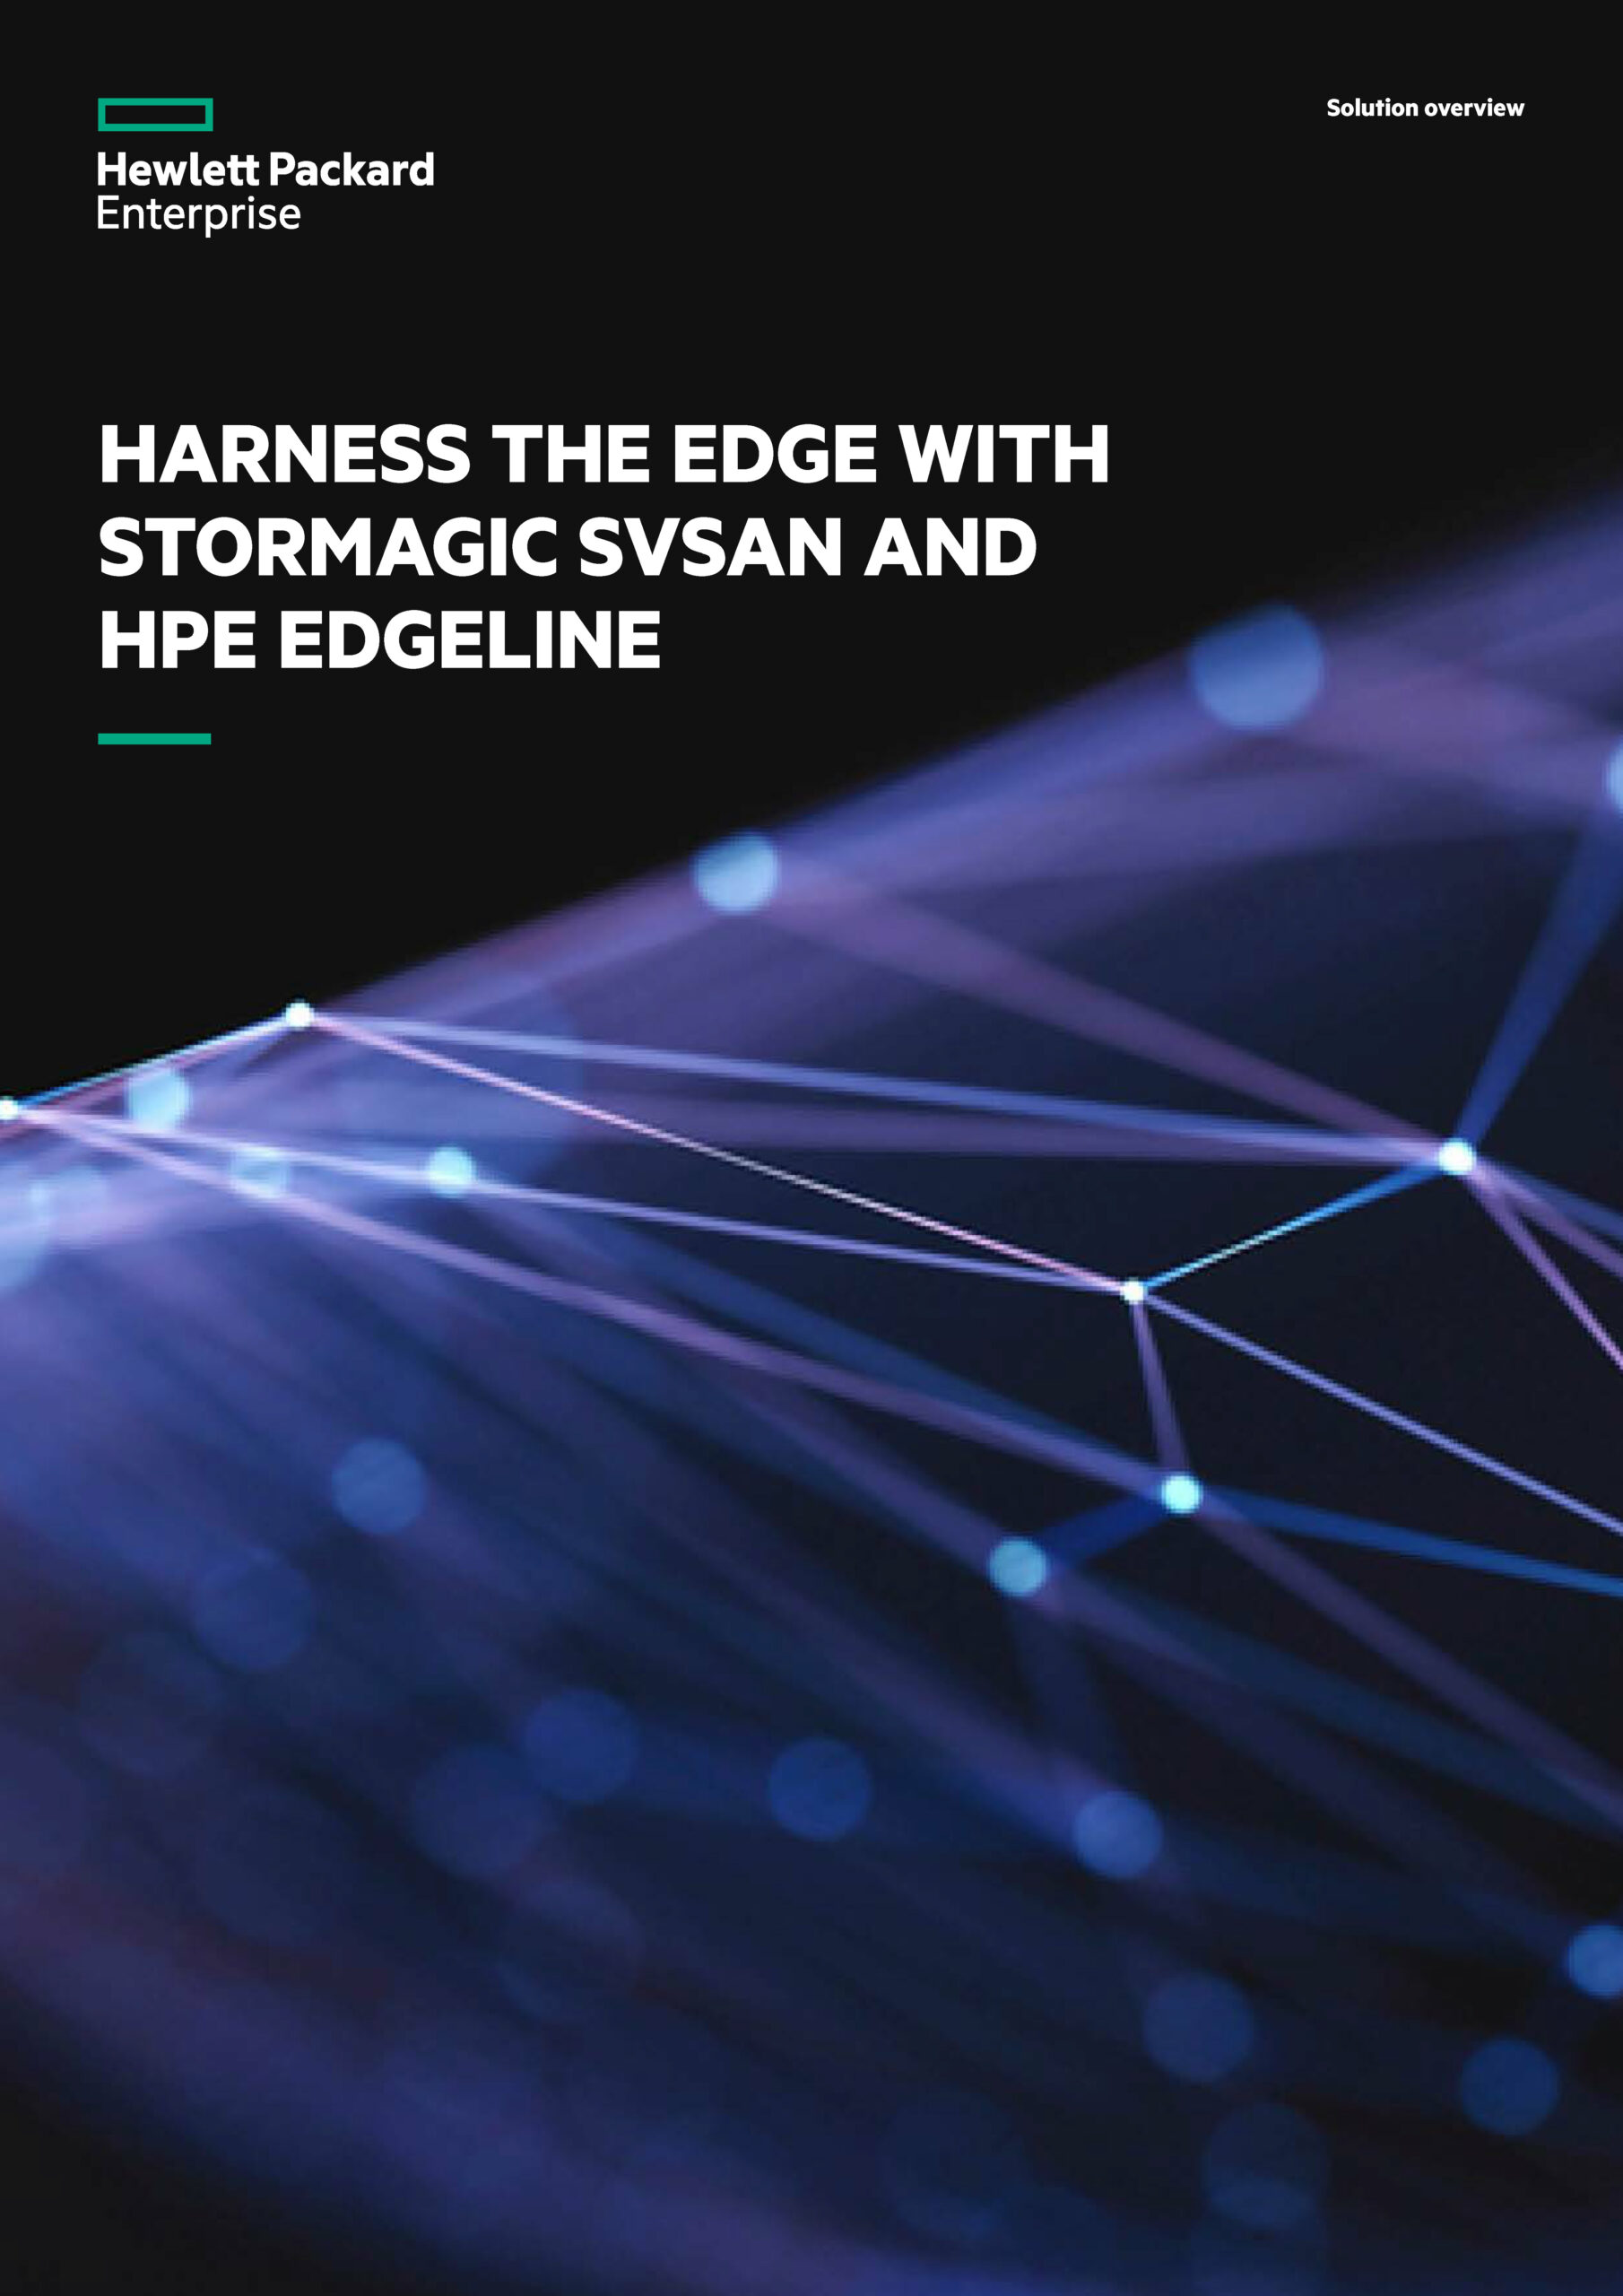 StorMagic SvSAN and HPE Edgeline Solution Brief